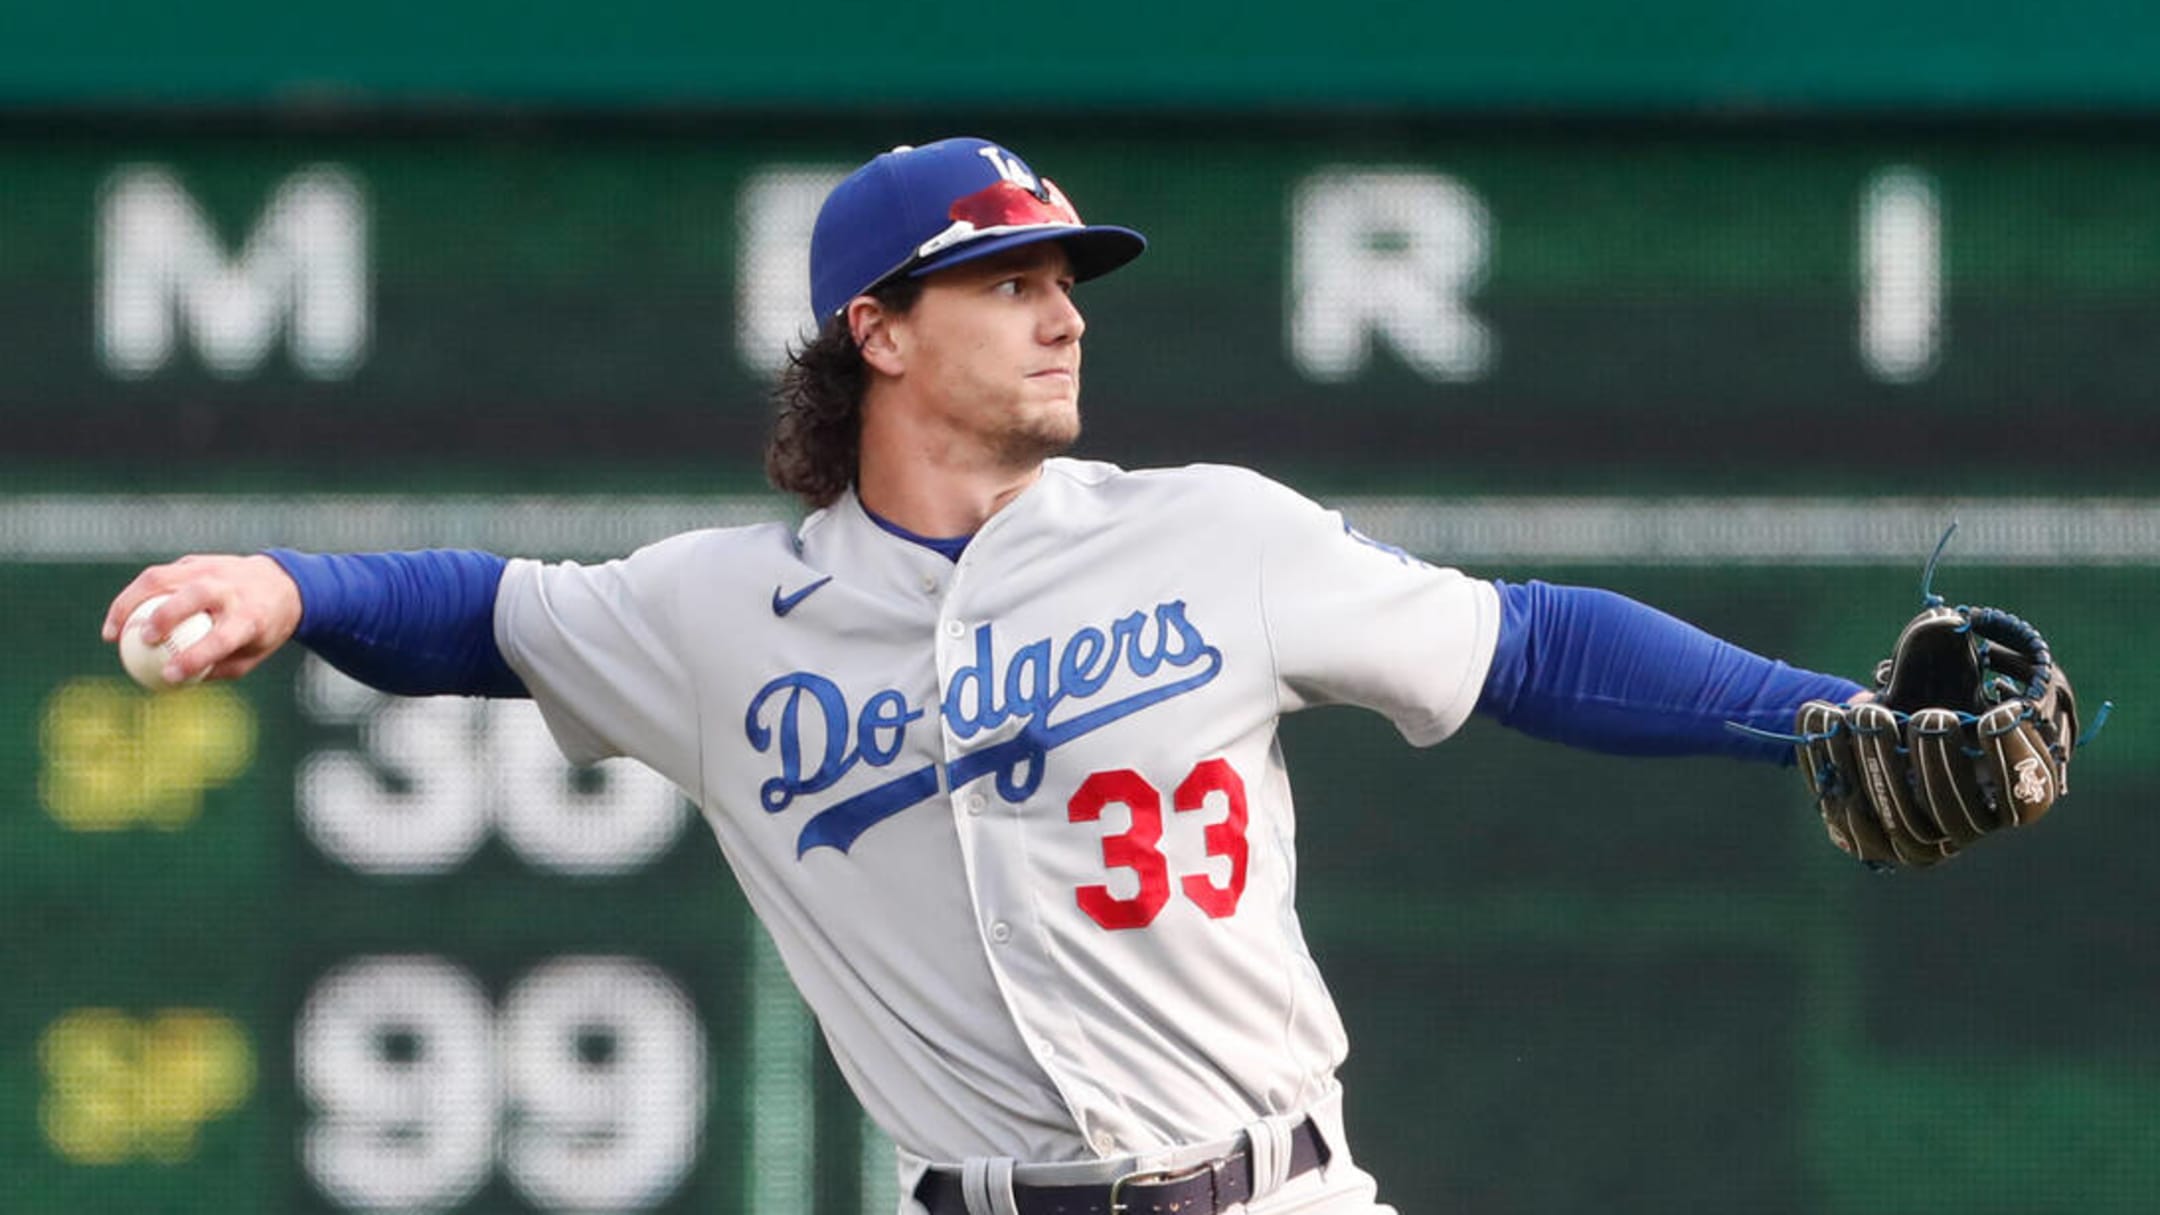 Dodgers' youth movement showing positive results